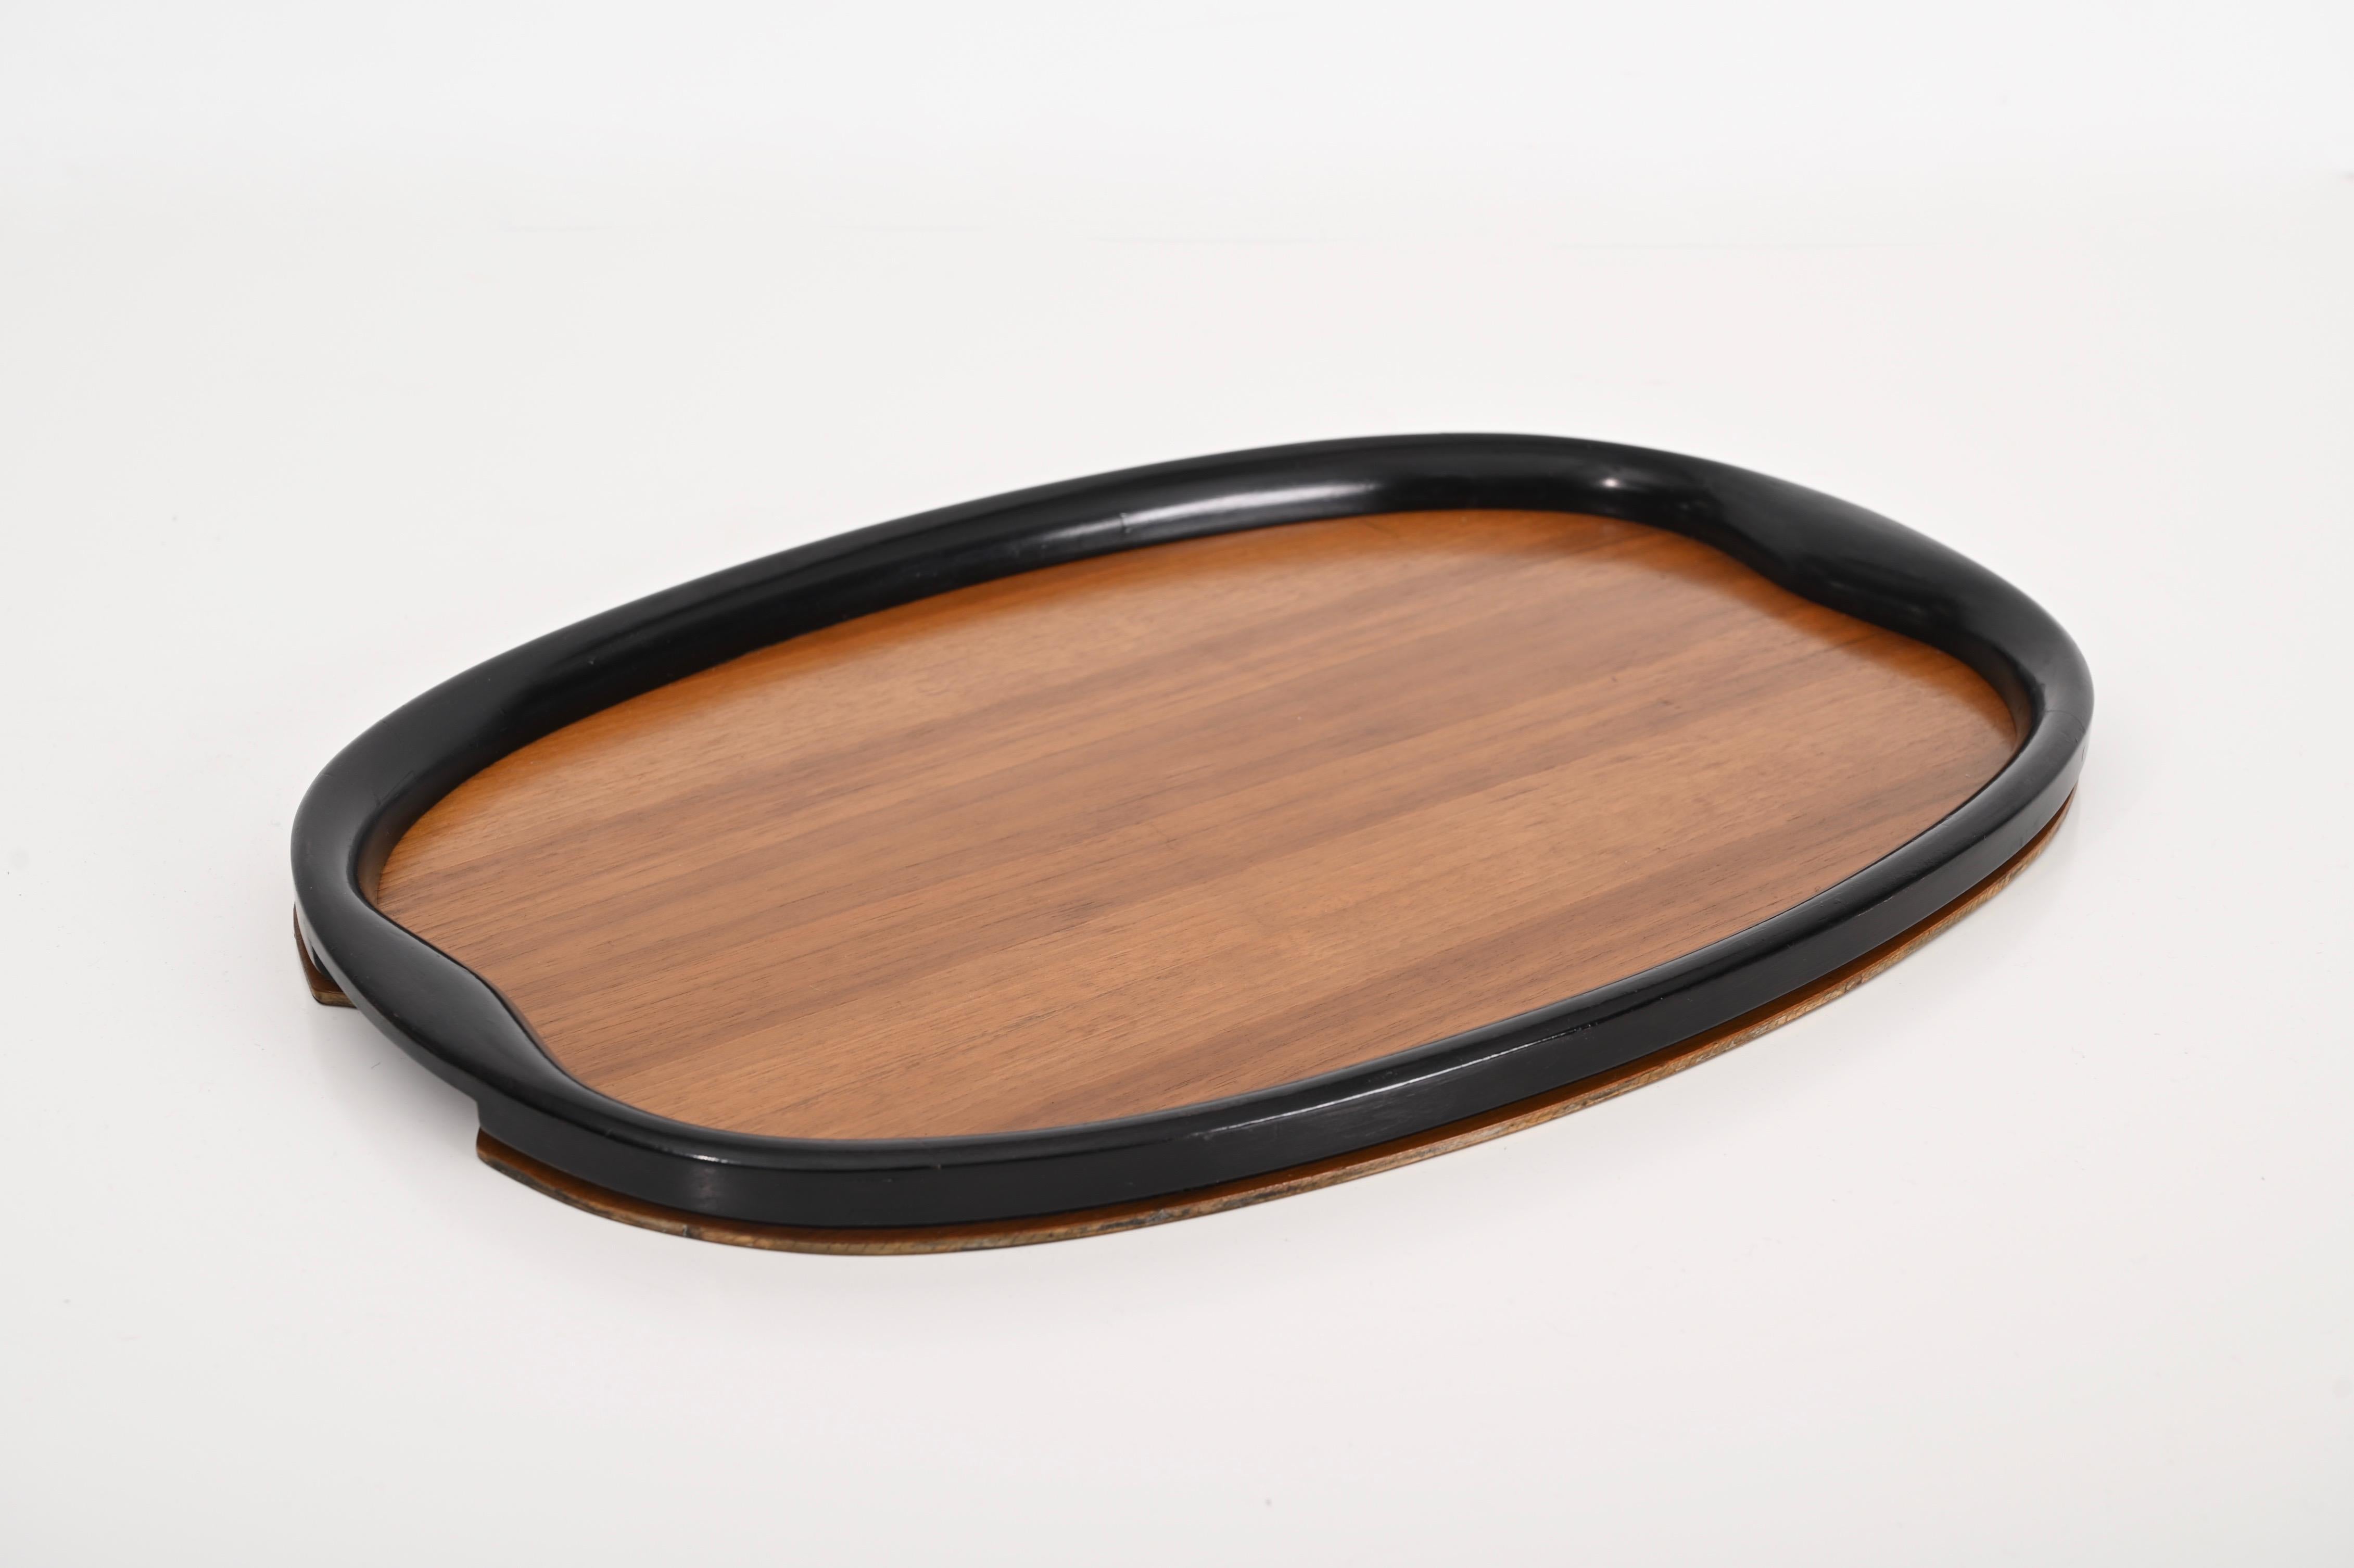 Pair of Art Deco Serving Trays, Ebonized Wood and Walnut, Italy, 1940s For Sale 2